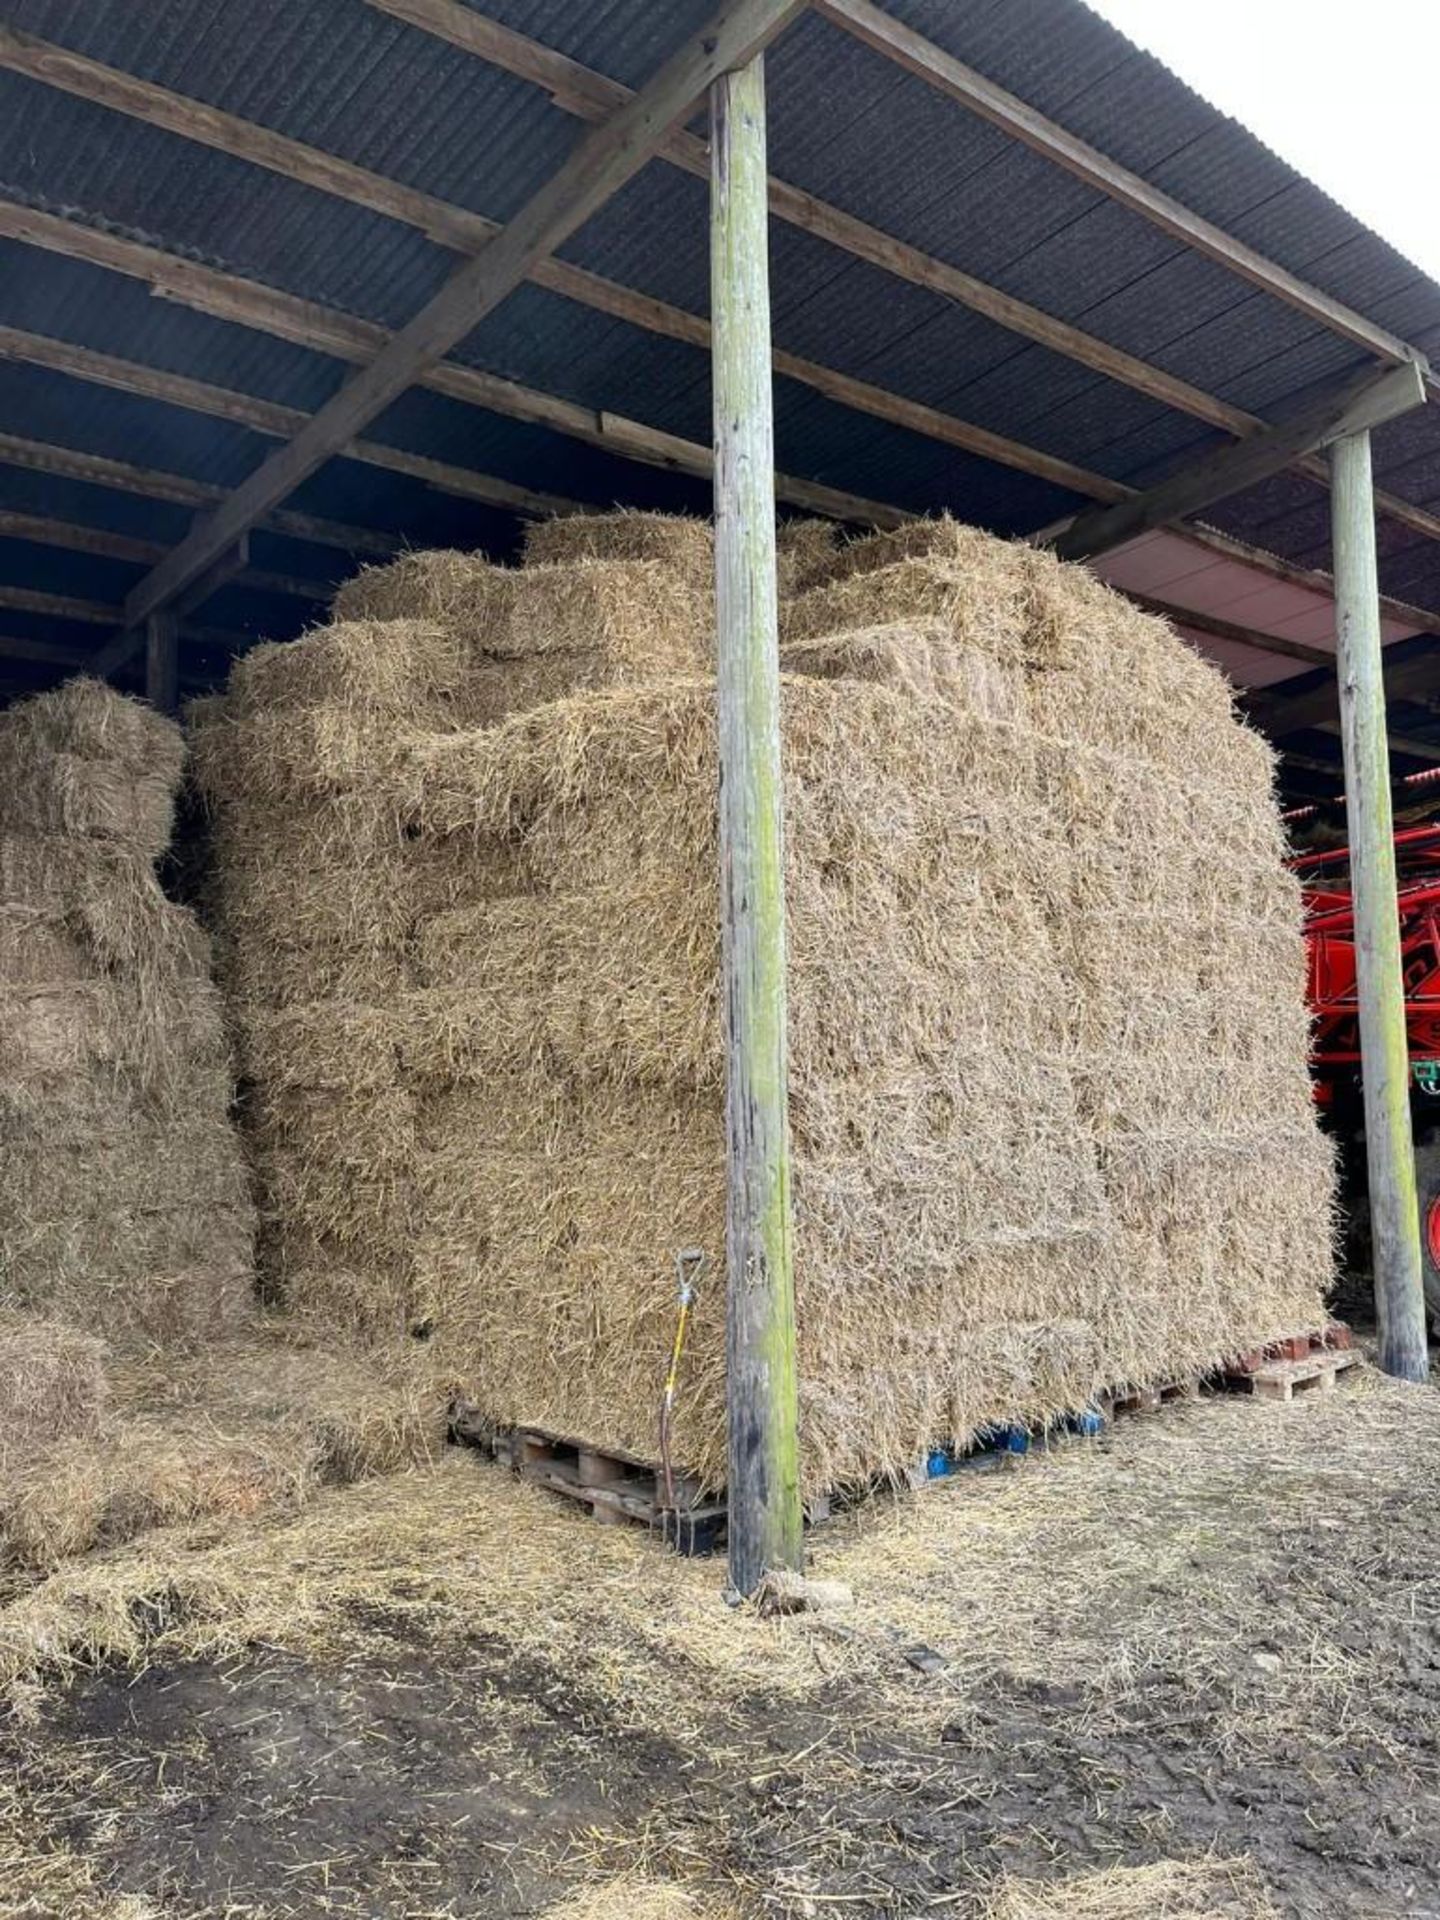 2023 300No. Conventional Straw Bales - (Cambridgeshire) - Image 2 of 3